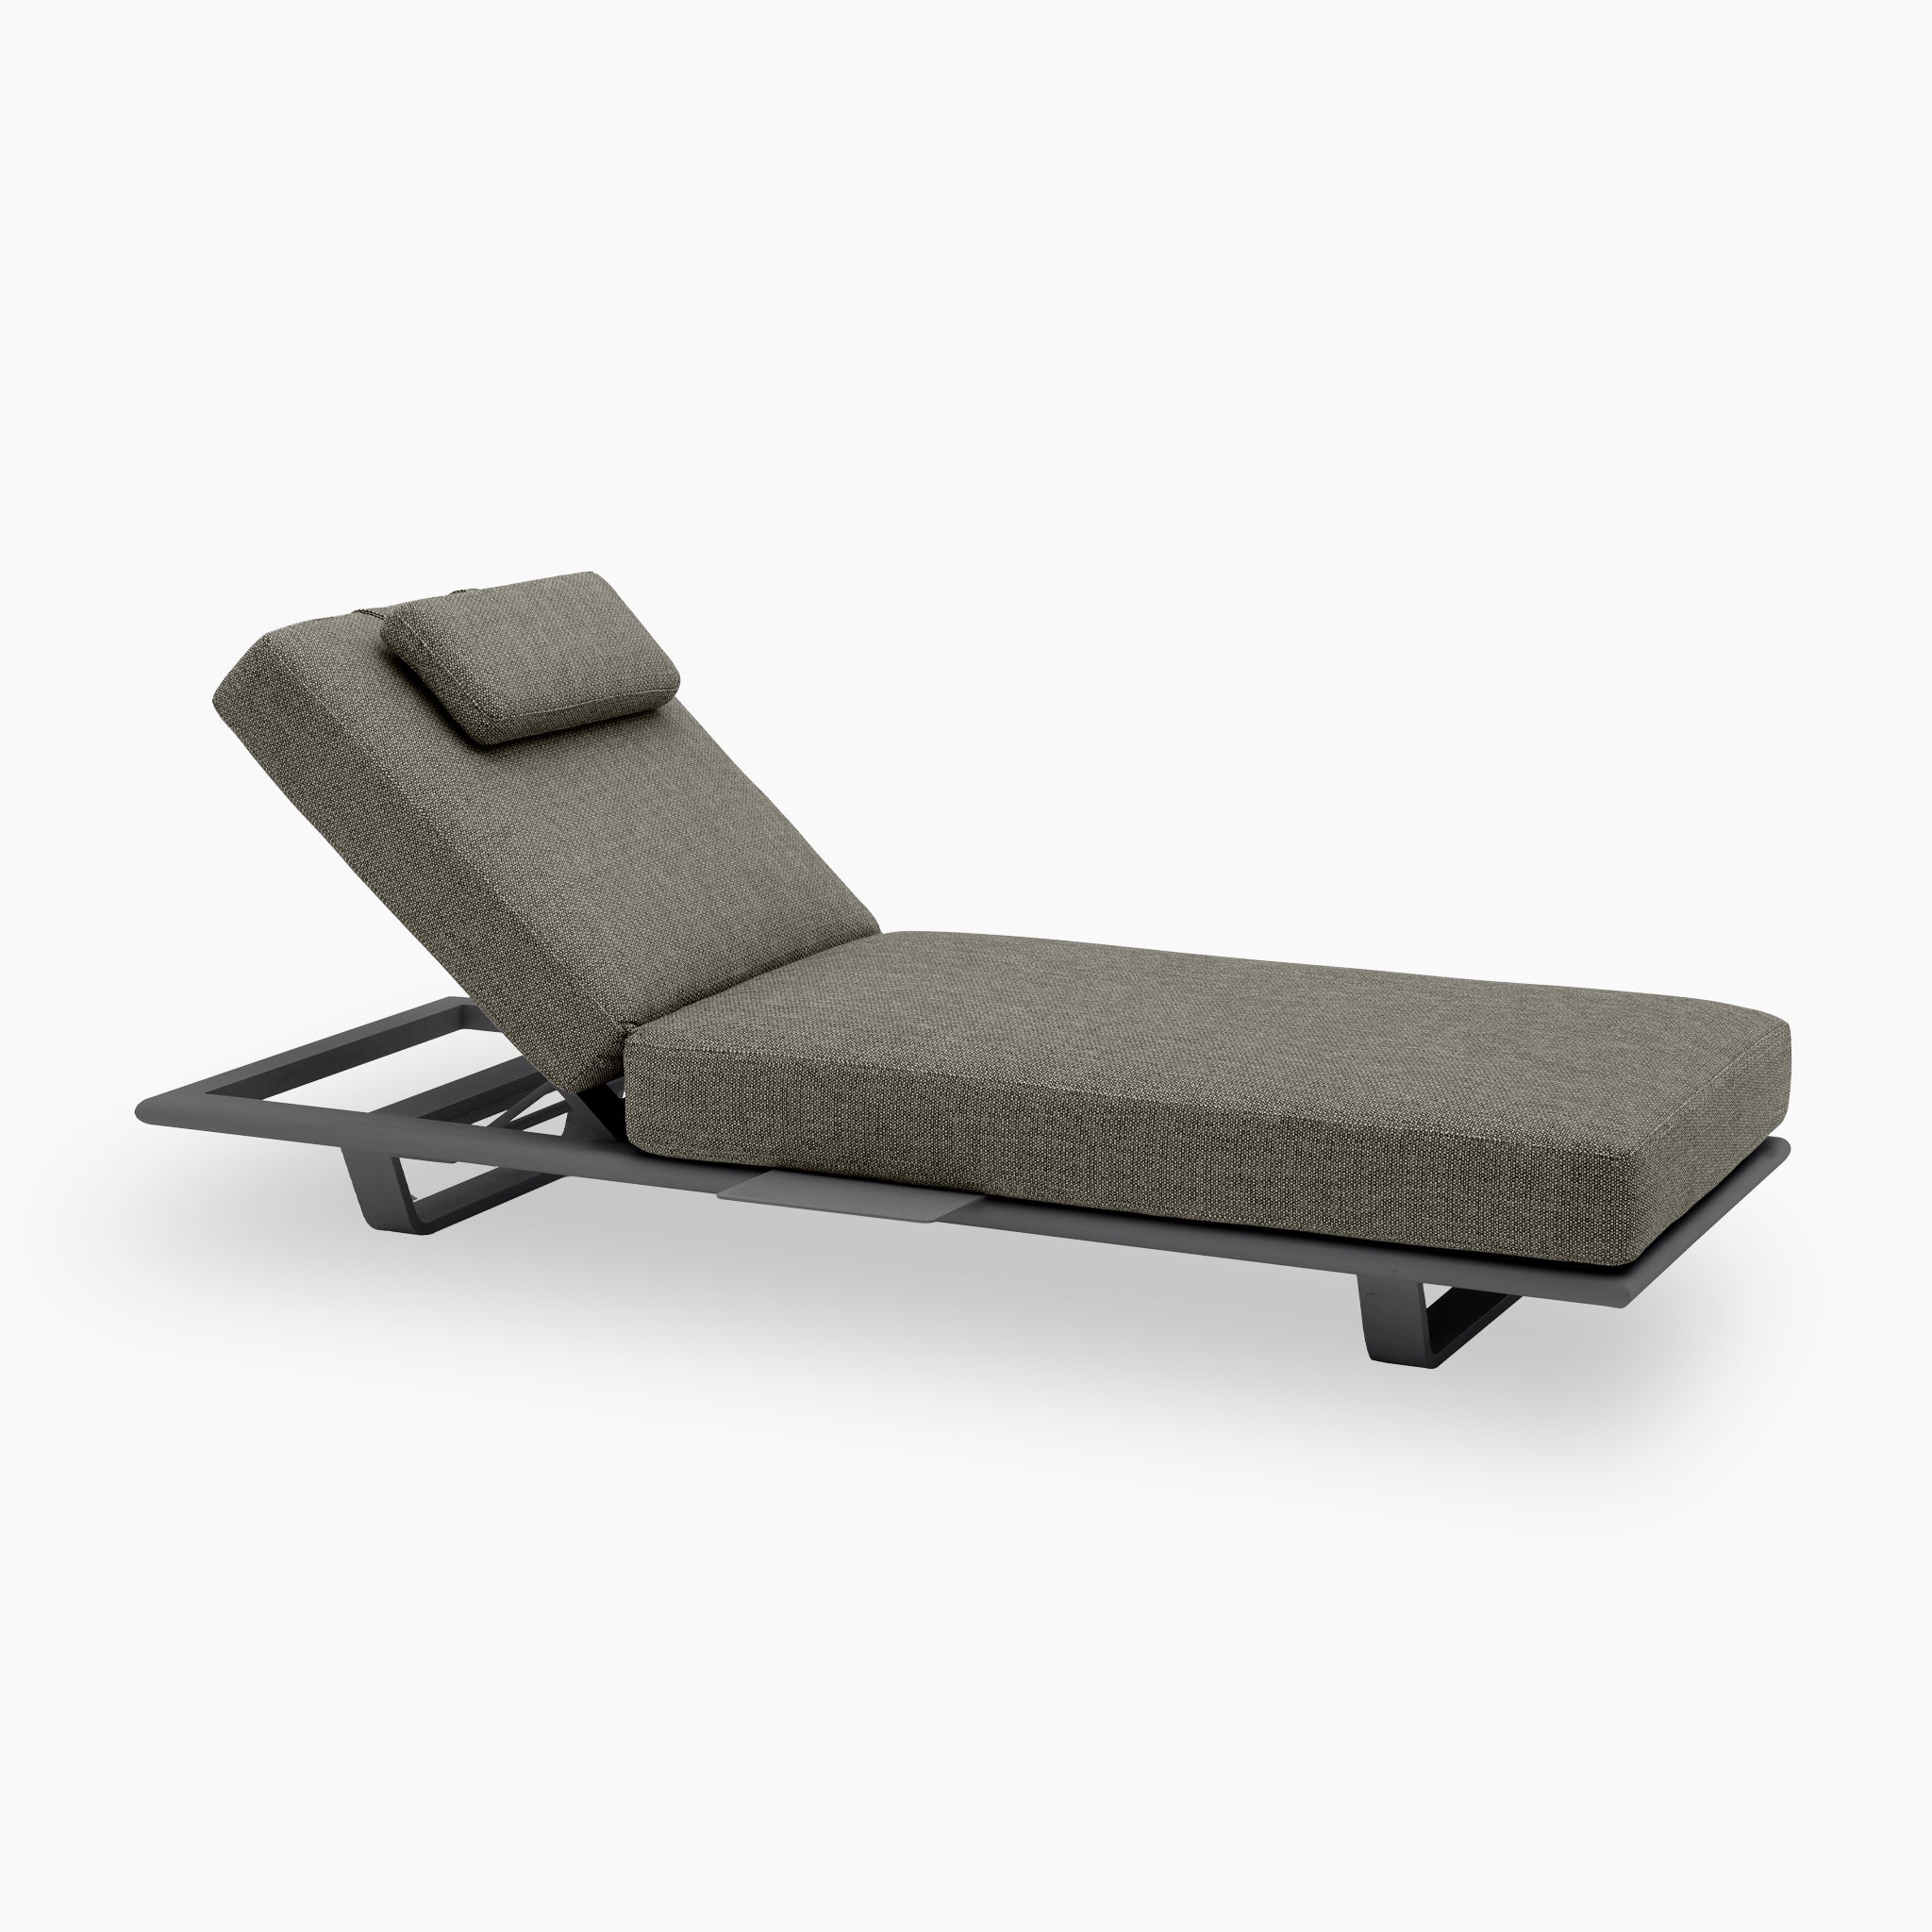 Hatia Single Sun Lounger with Side Table in Charcoal